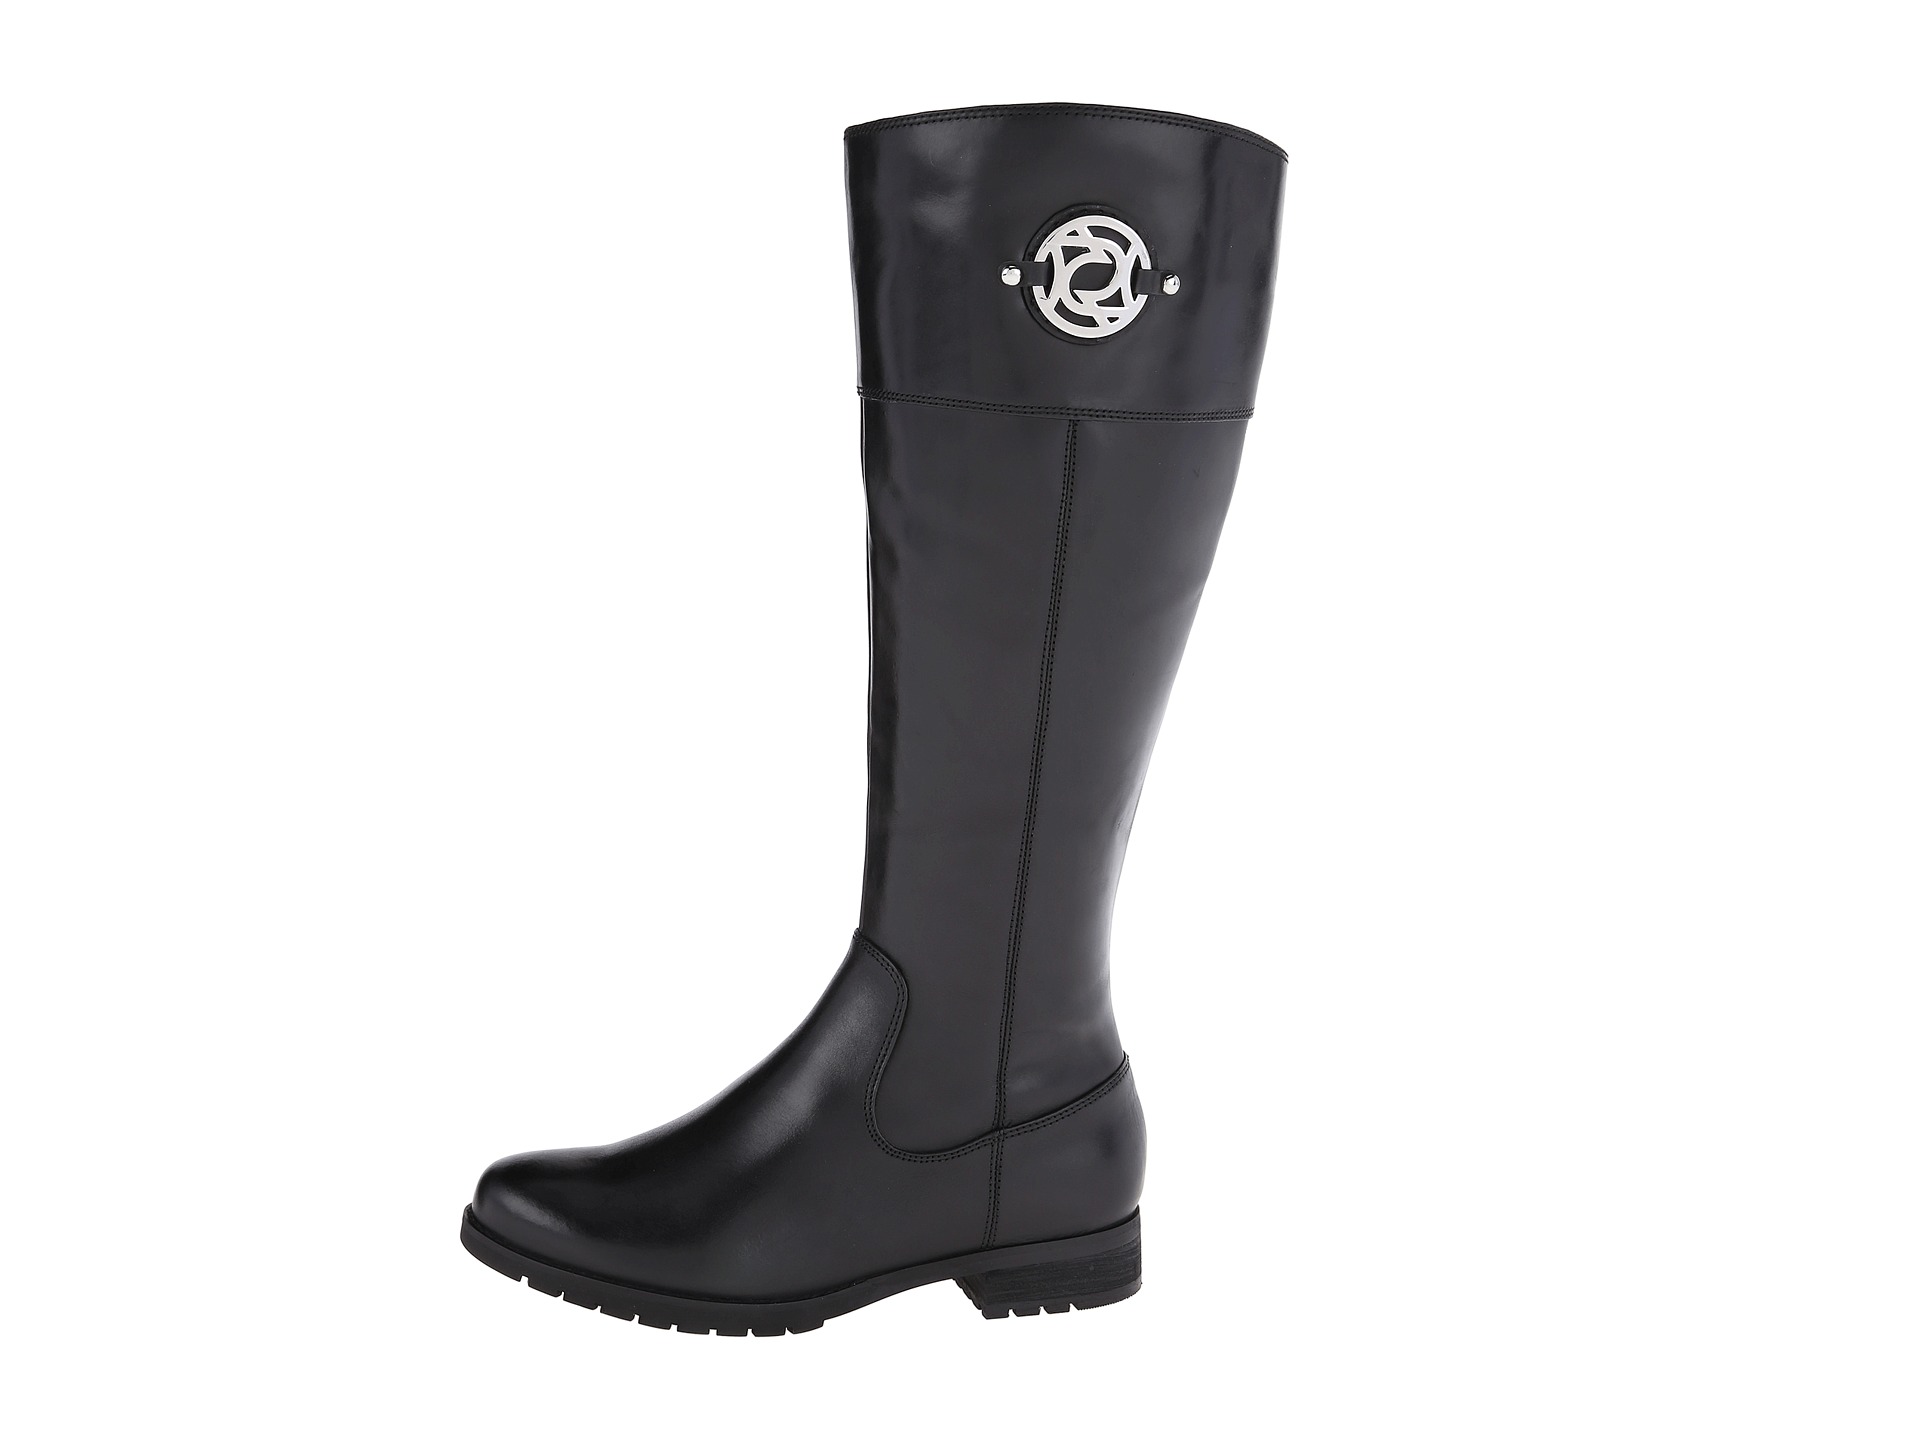 No results for rockport tristina crest riding boot - Search Zappos